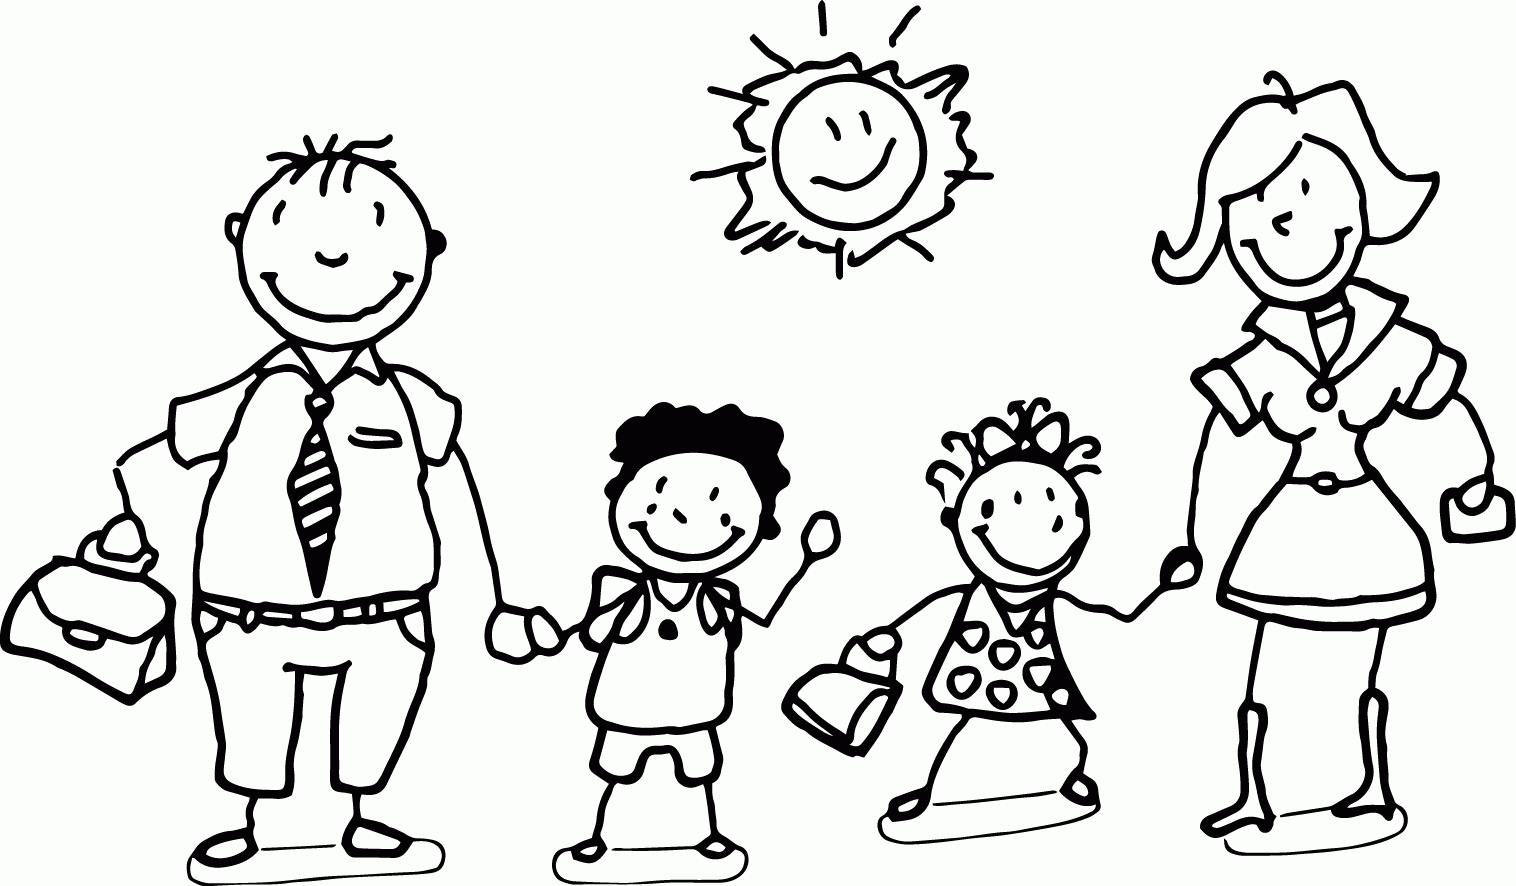 free-family-picture-coloring-page-download-free-family-picture